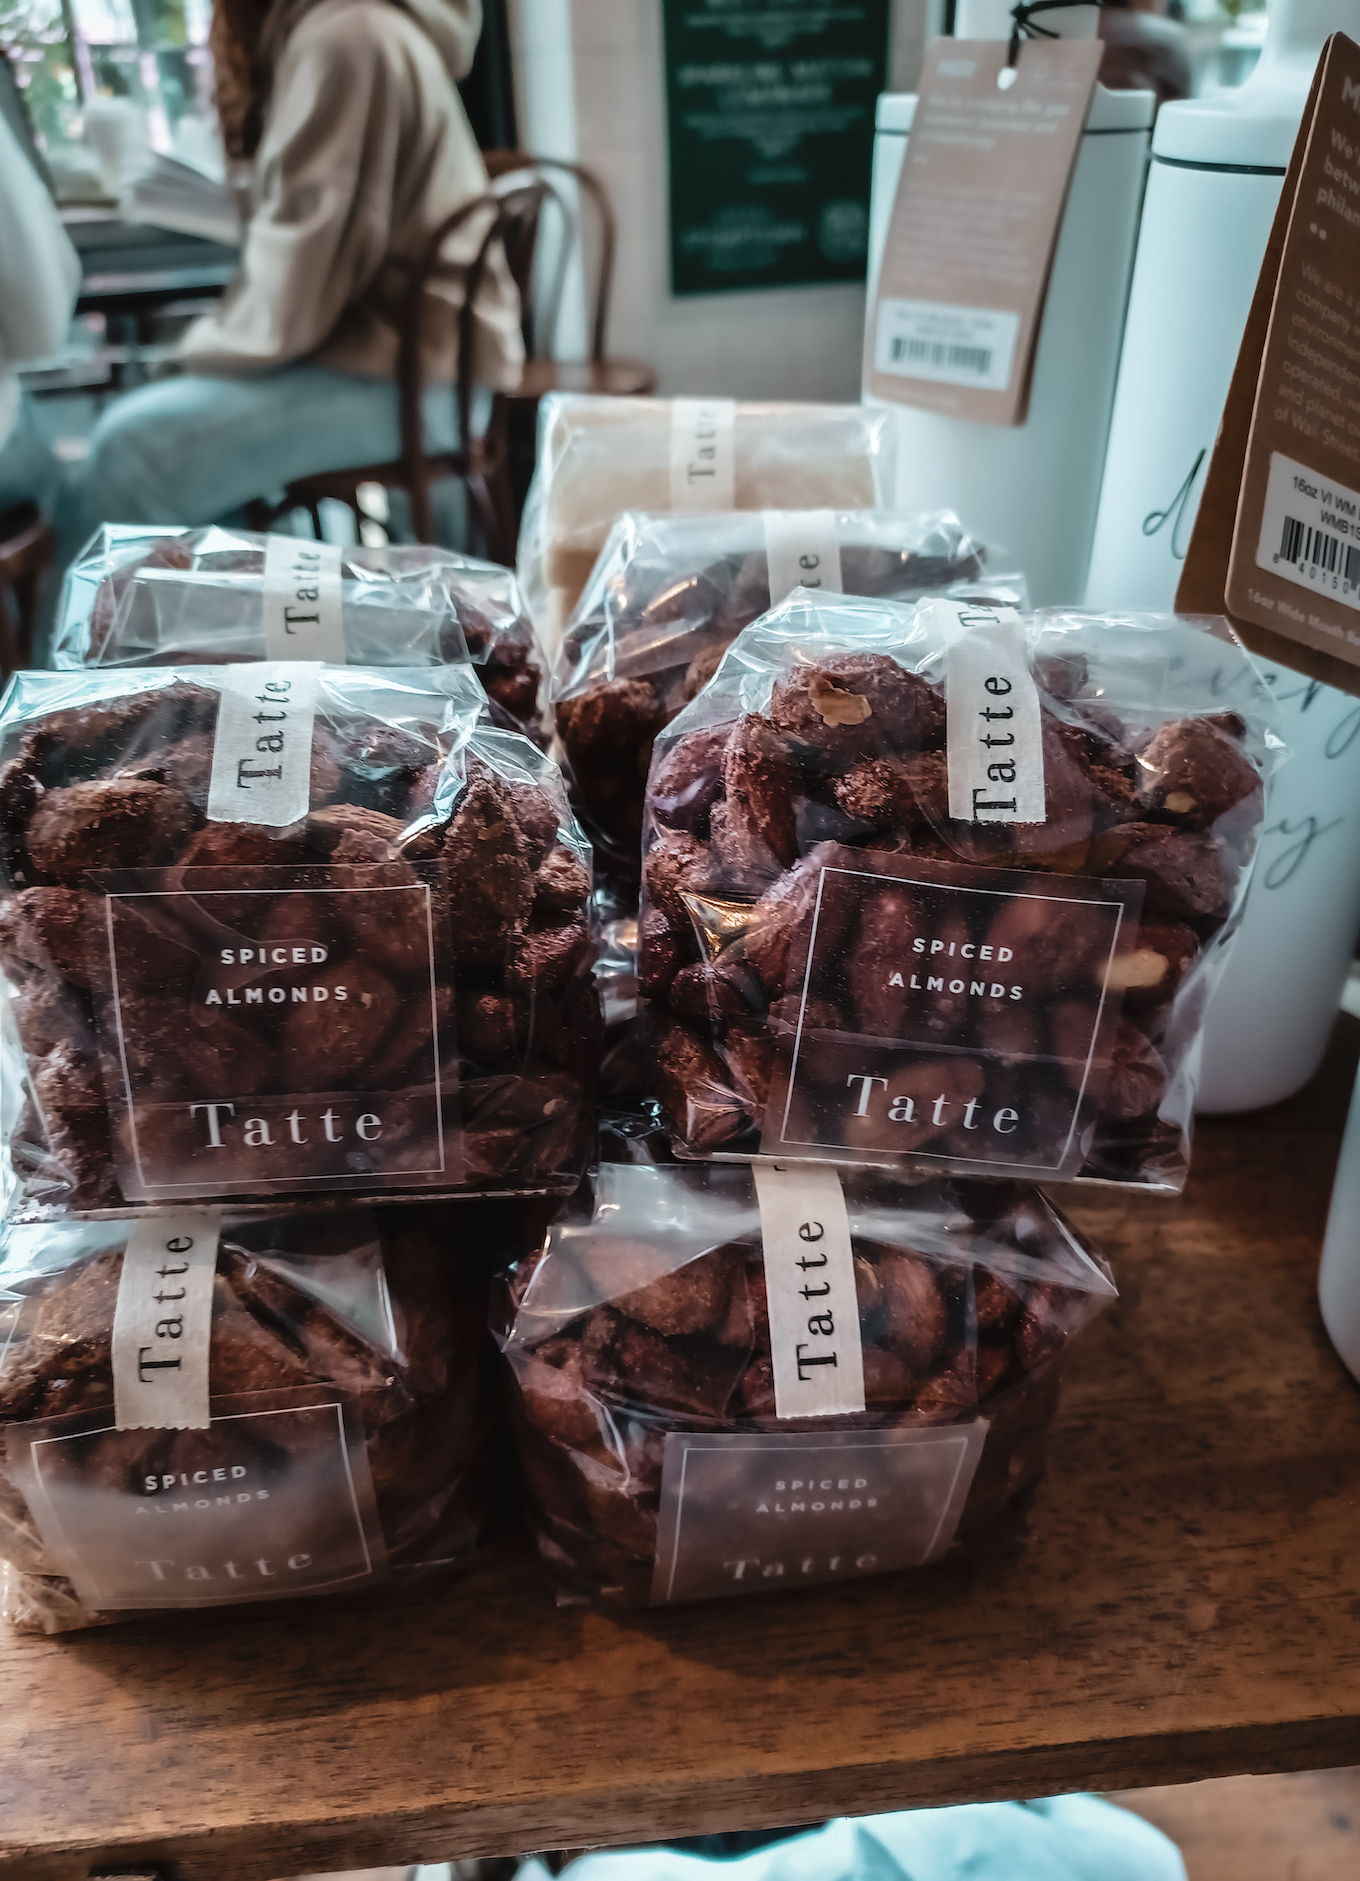 Package of spiced almonds at Tatte Bakery.